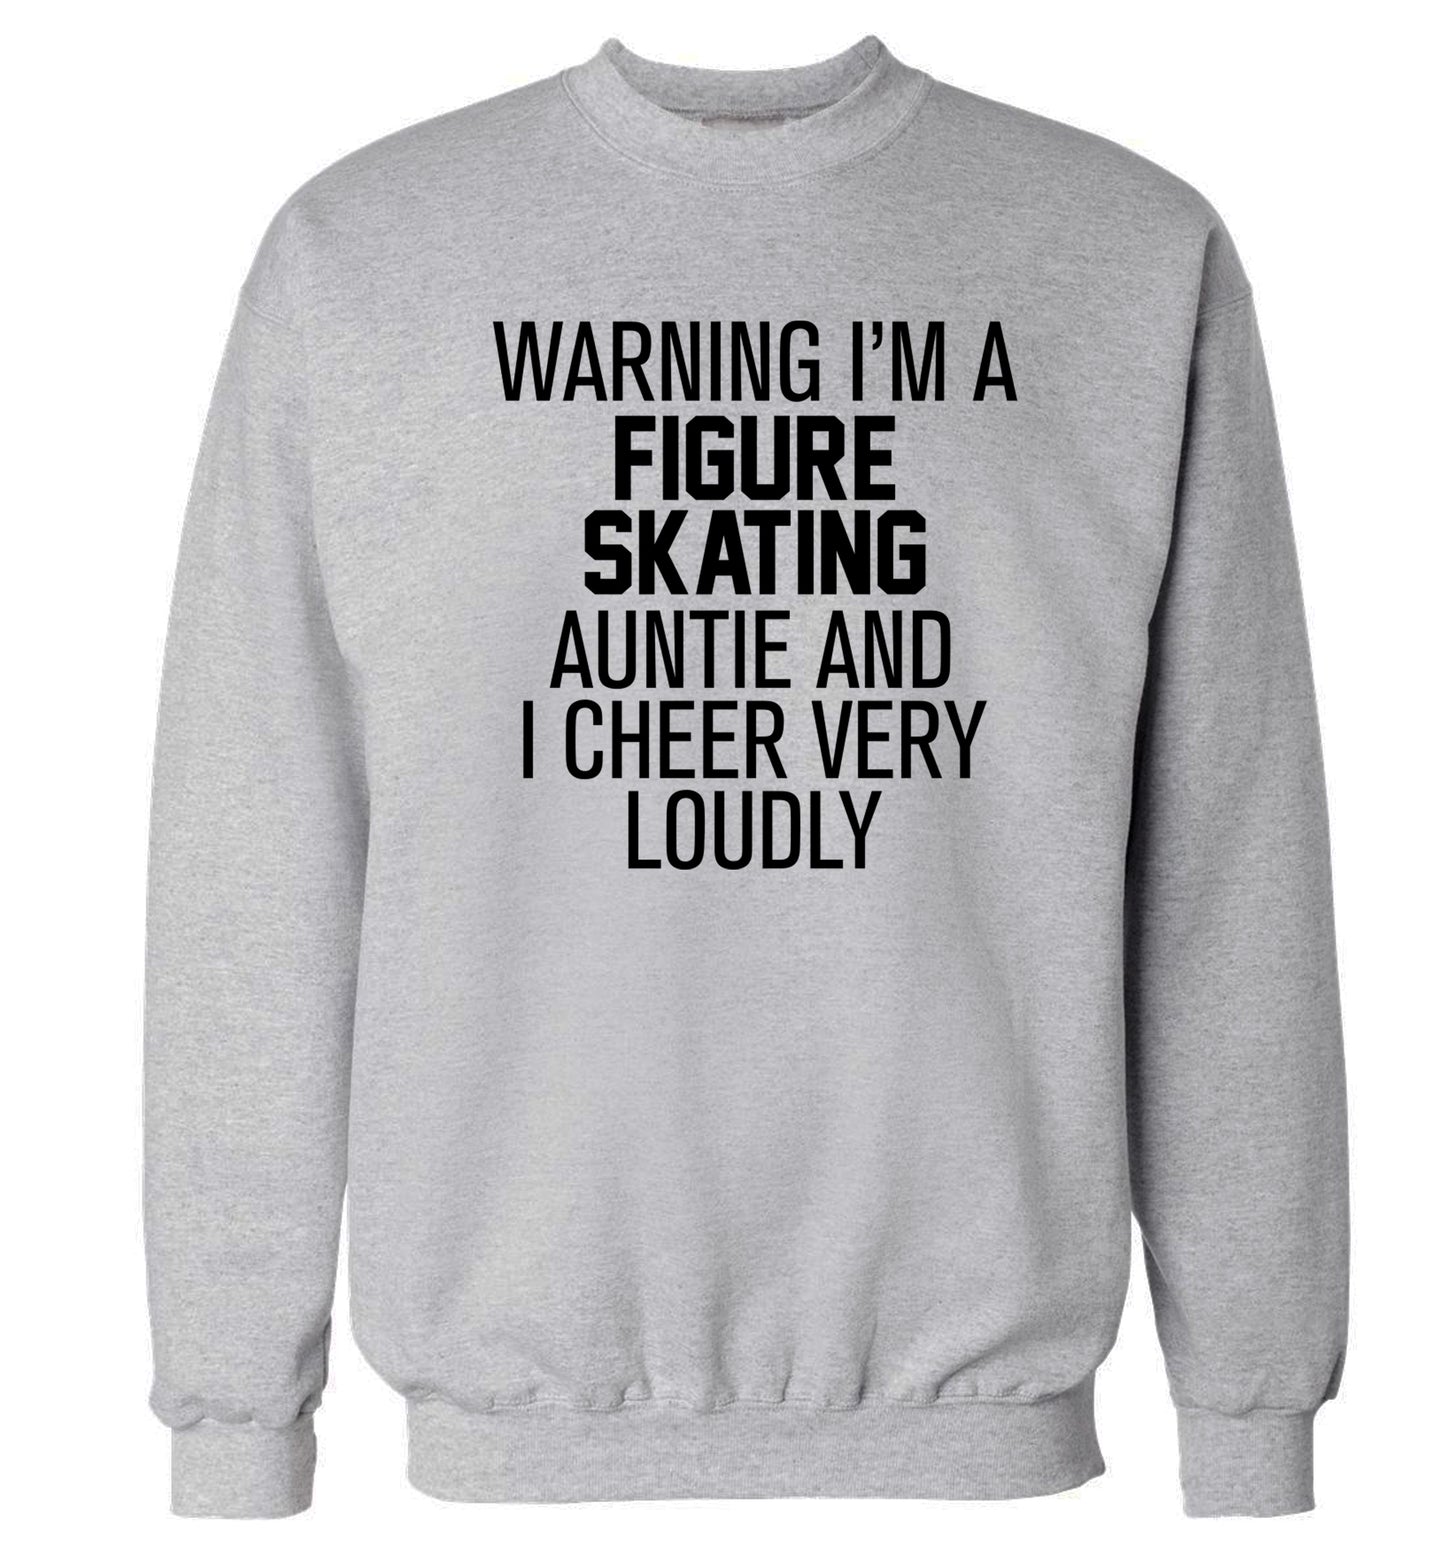 Warning I'm a figure skating auntie and I cheer very loudly Adult's unisexgrey Sweater 2XL